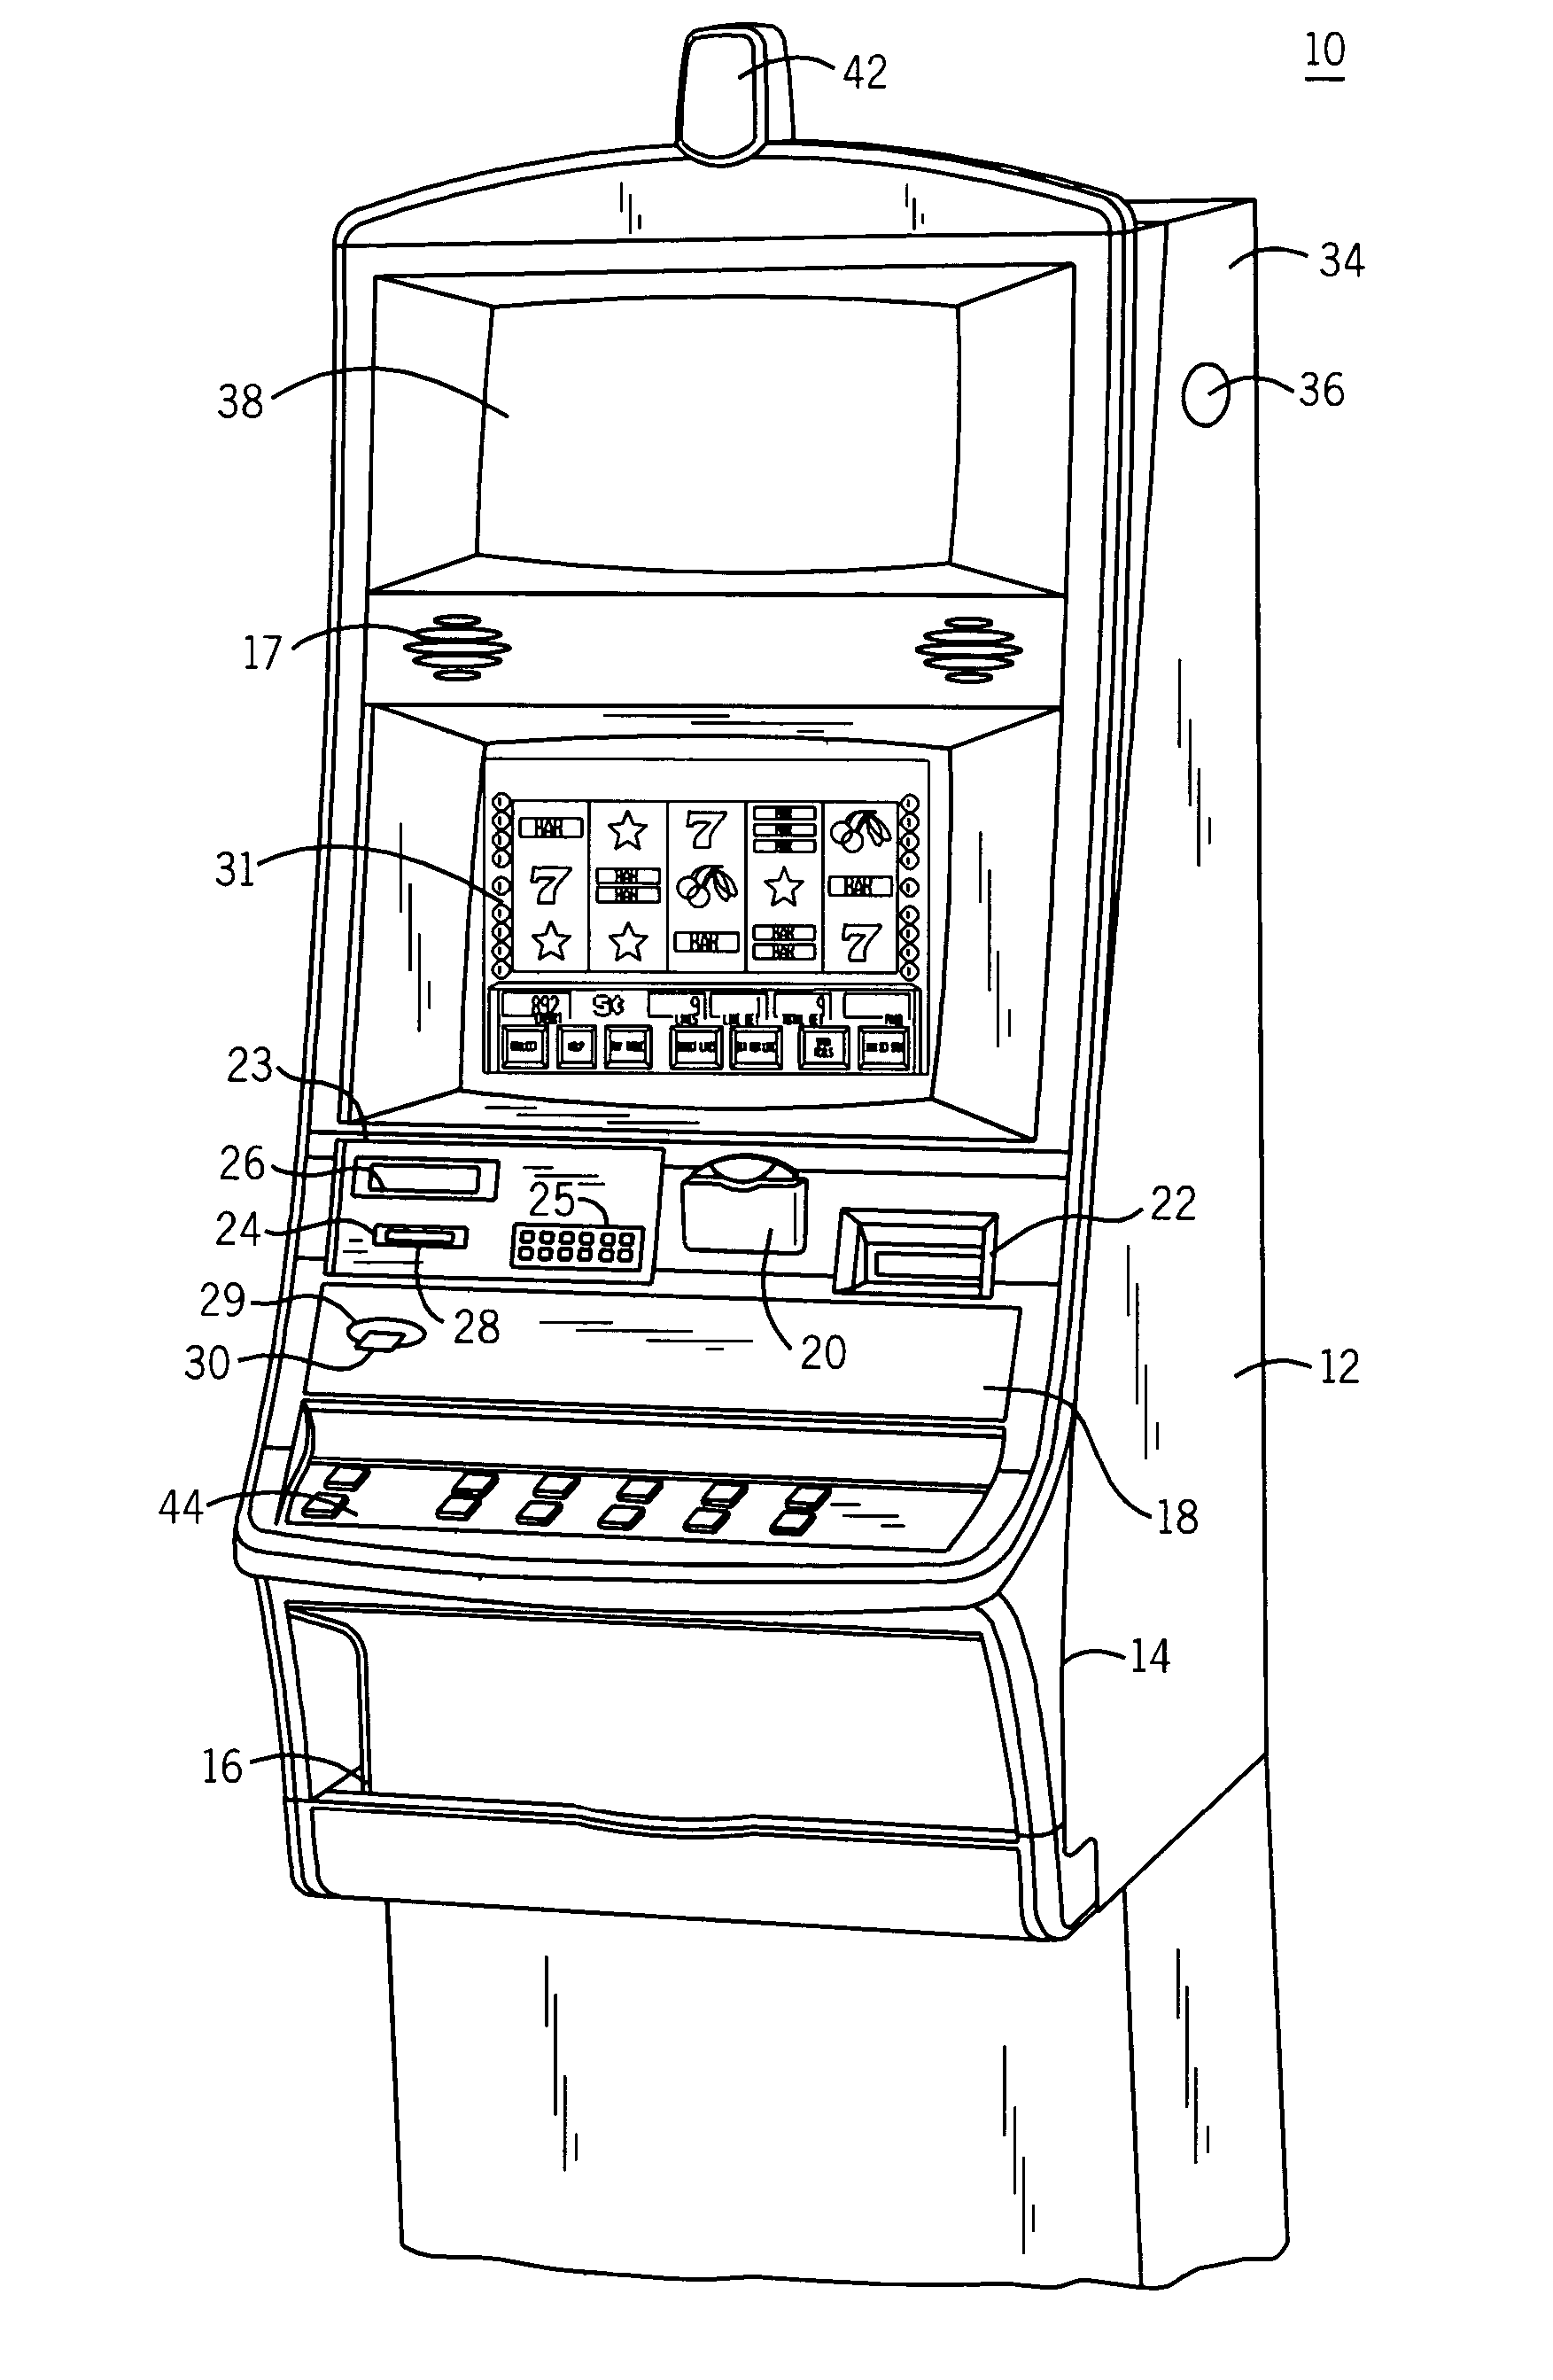 Gaming machine with a trunnion mounted display